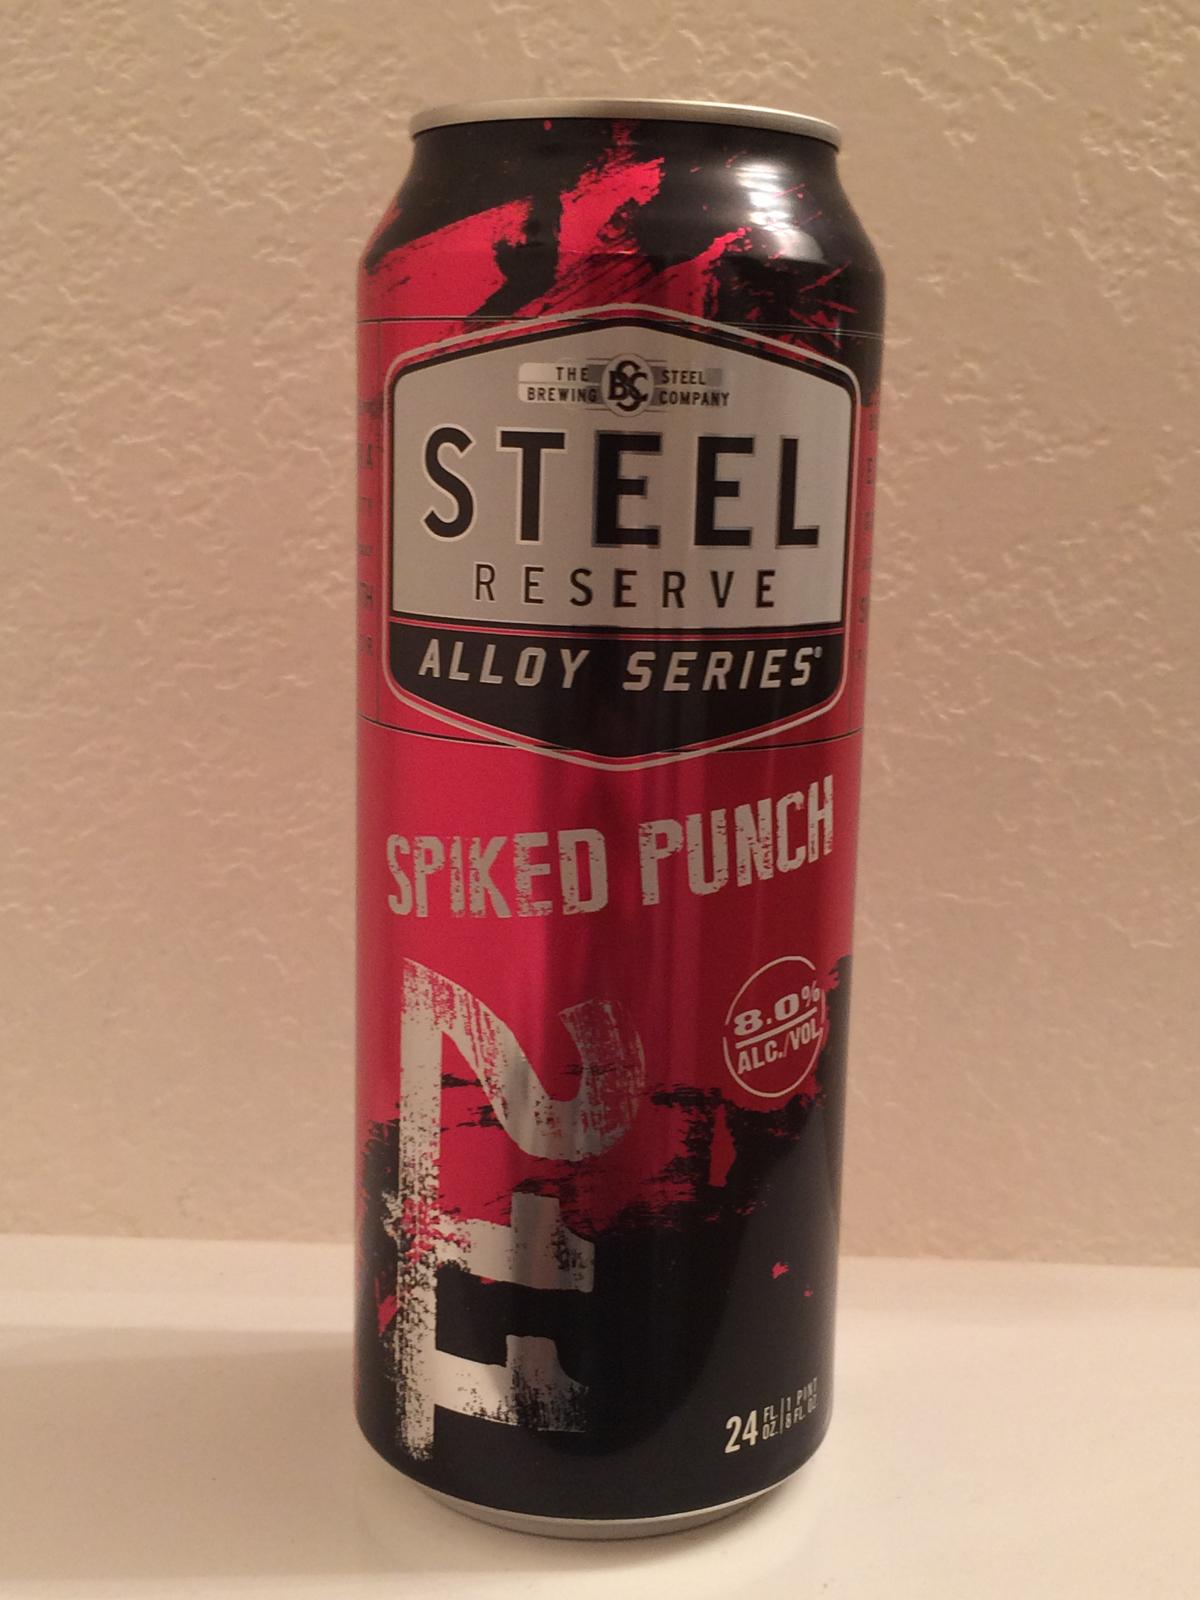 Alloy Series: Steel Reserve Spiked Punch 